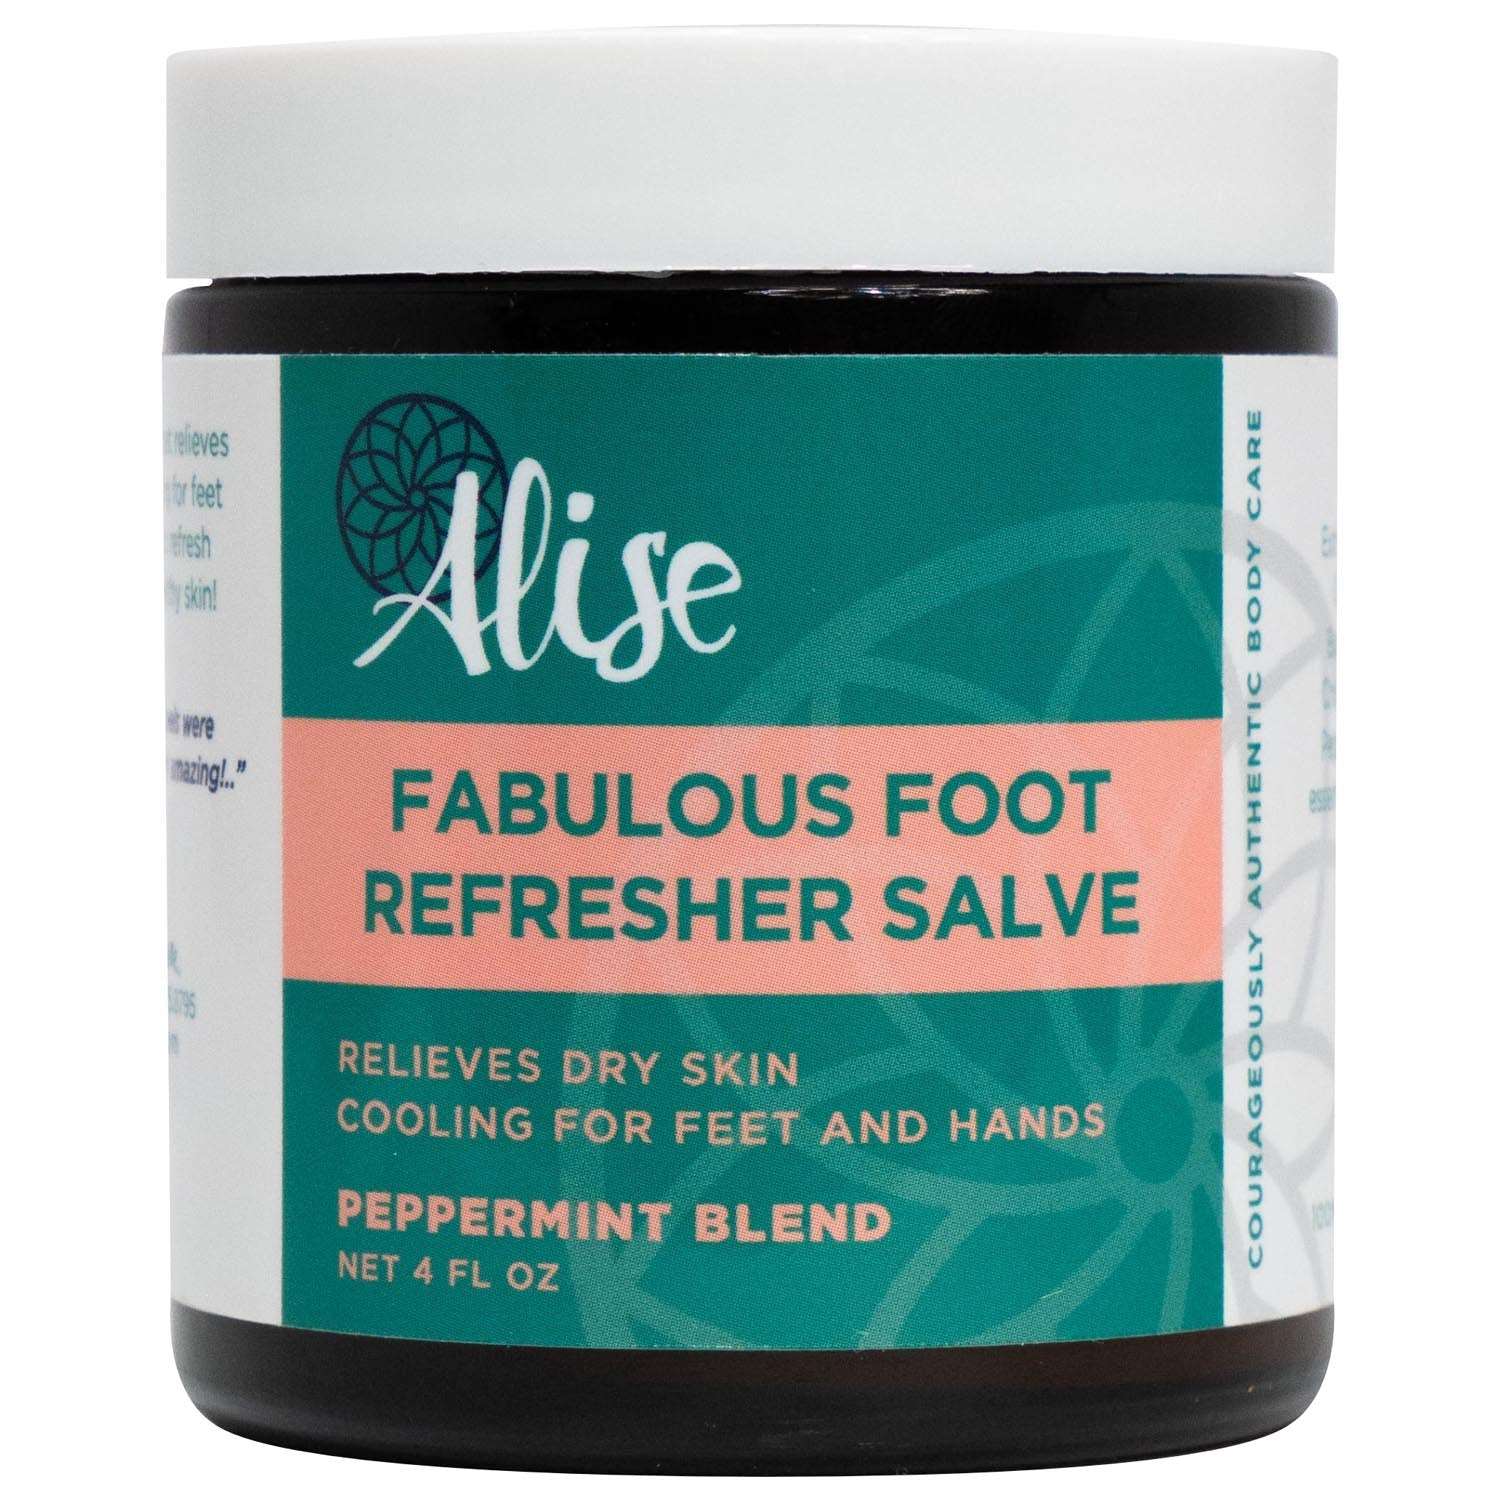 Fabulous Foot Refresher Salve Peppermint Blend 4oz handcrafted by Alise Body Care